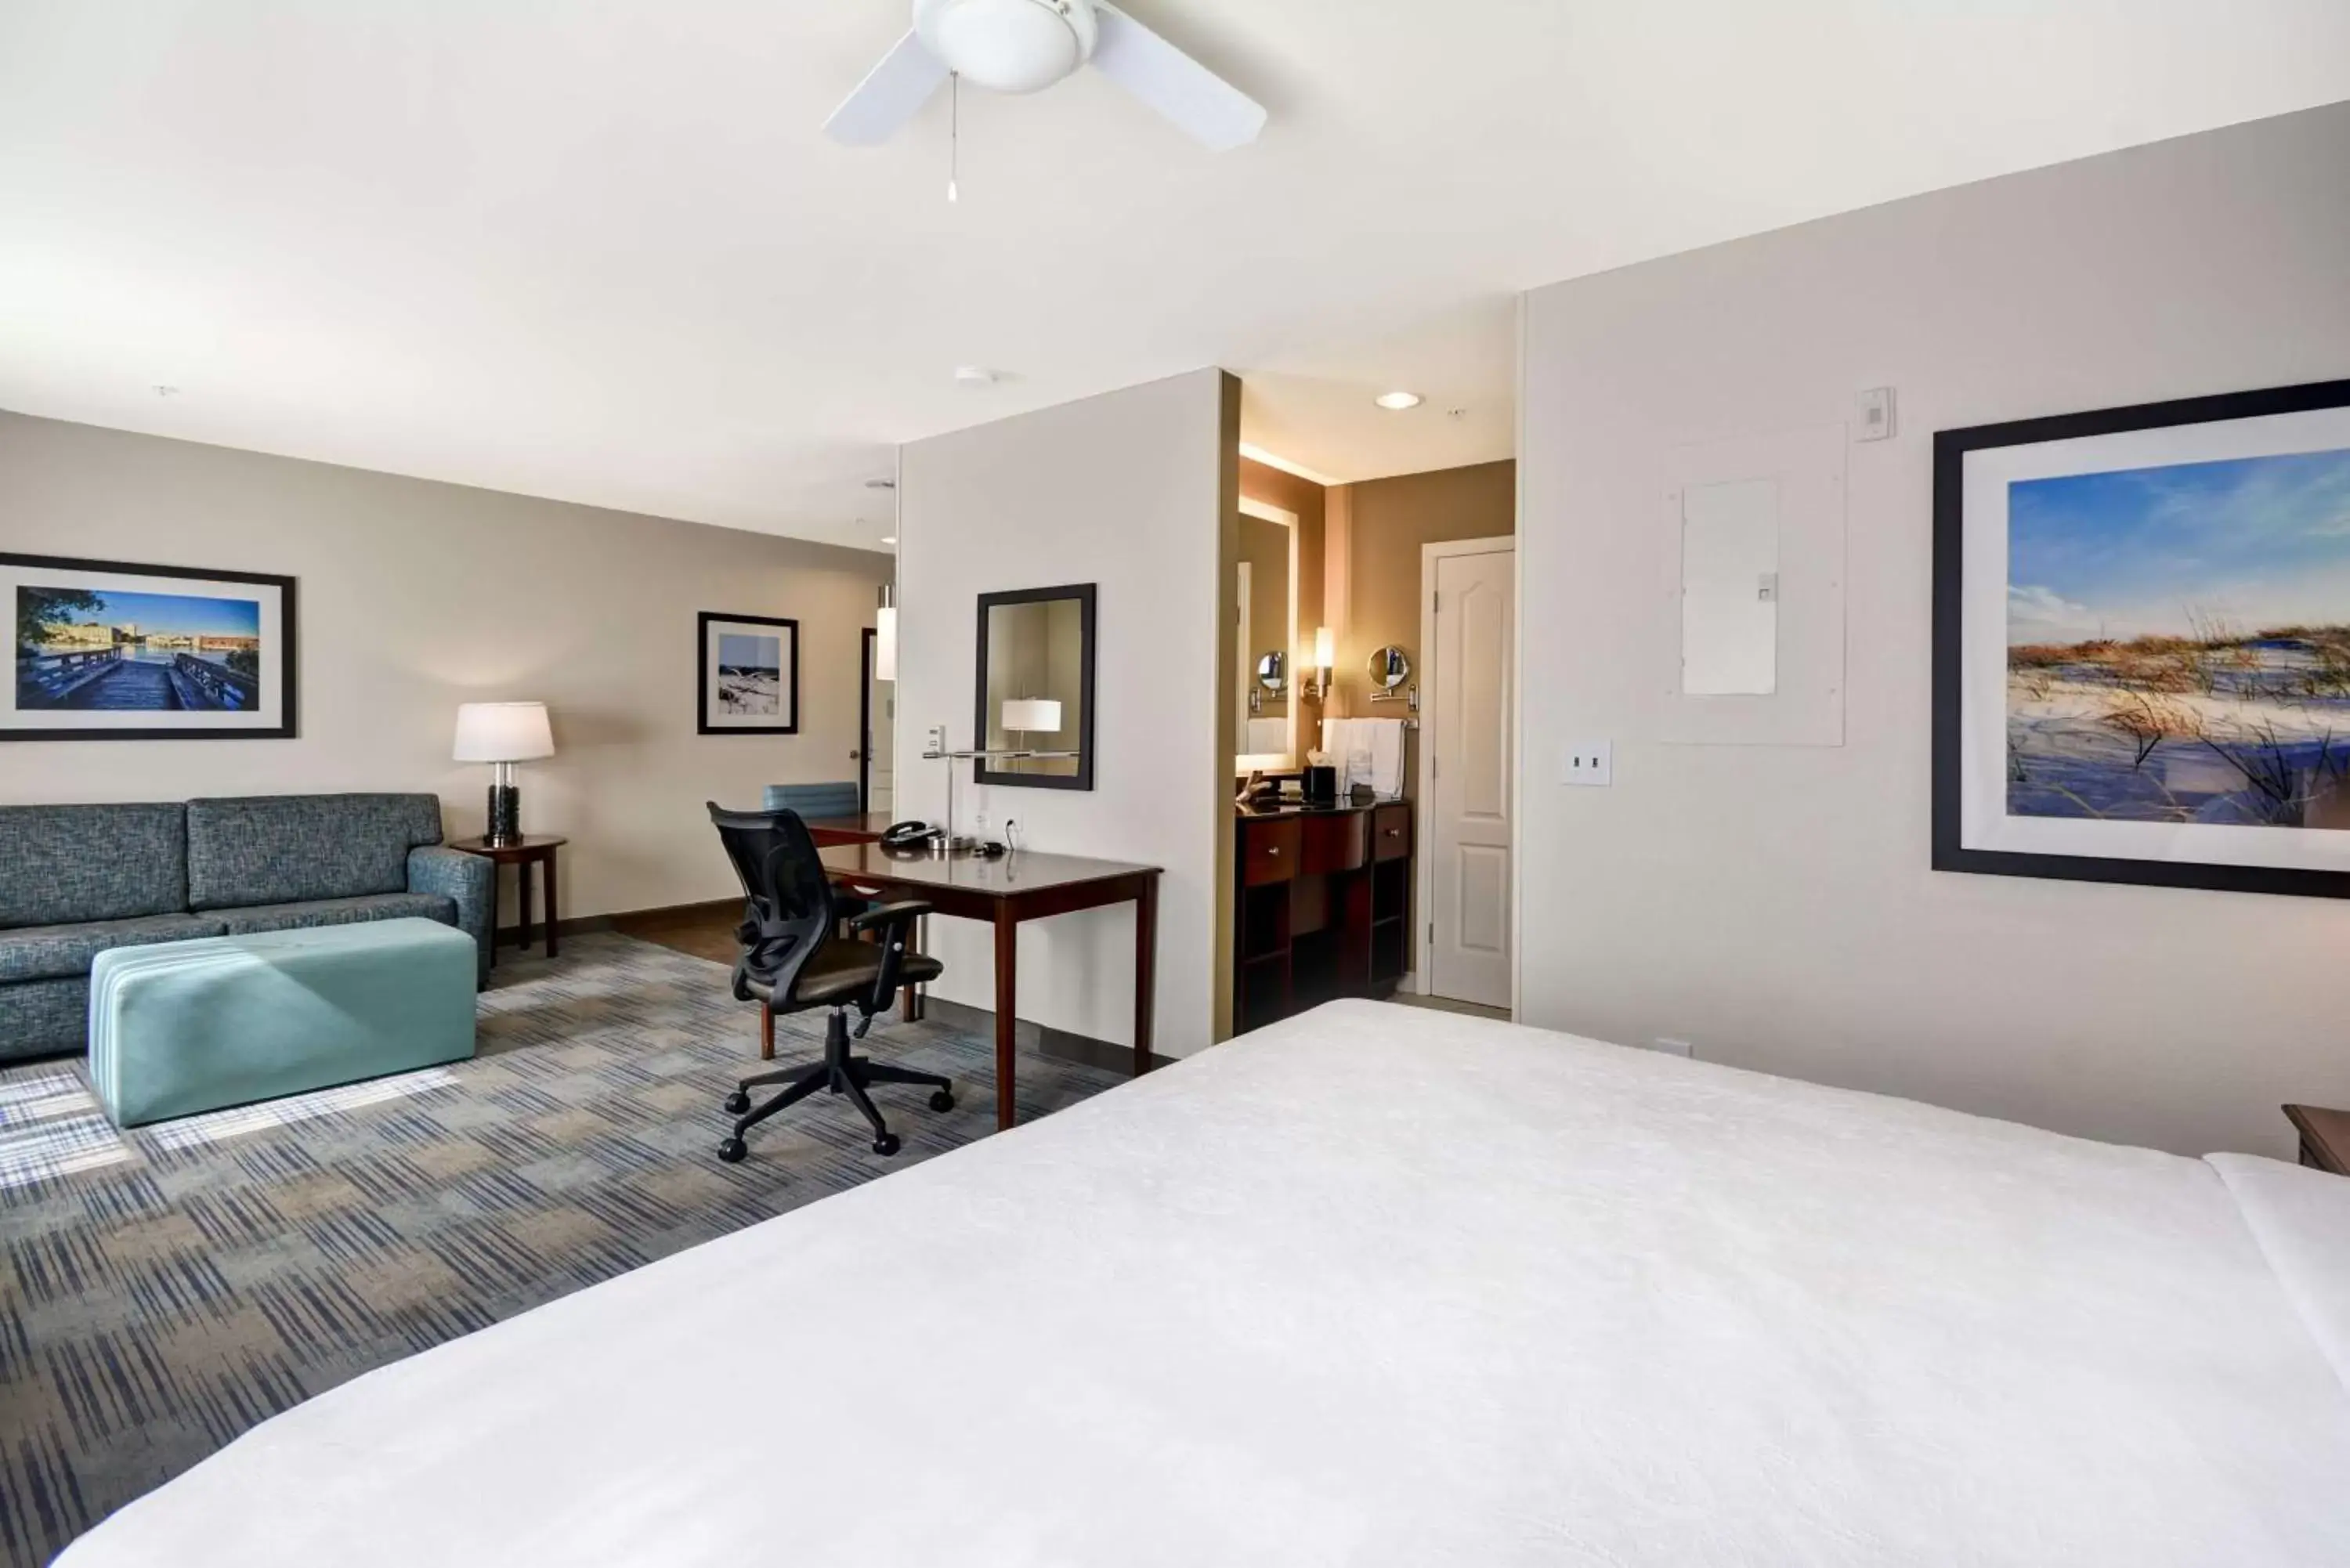 Bedroom in Homewood Suites by Hilton Wilmington/Mayfaire, NC